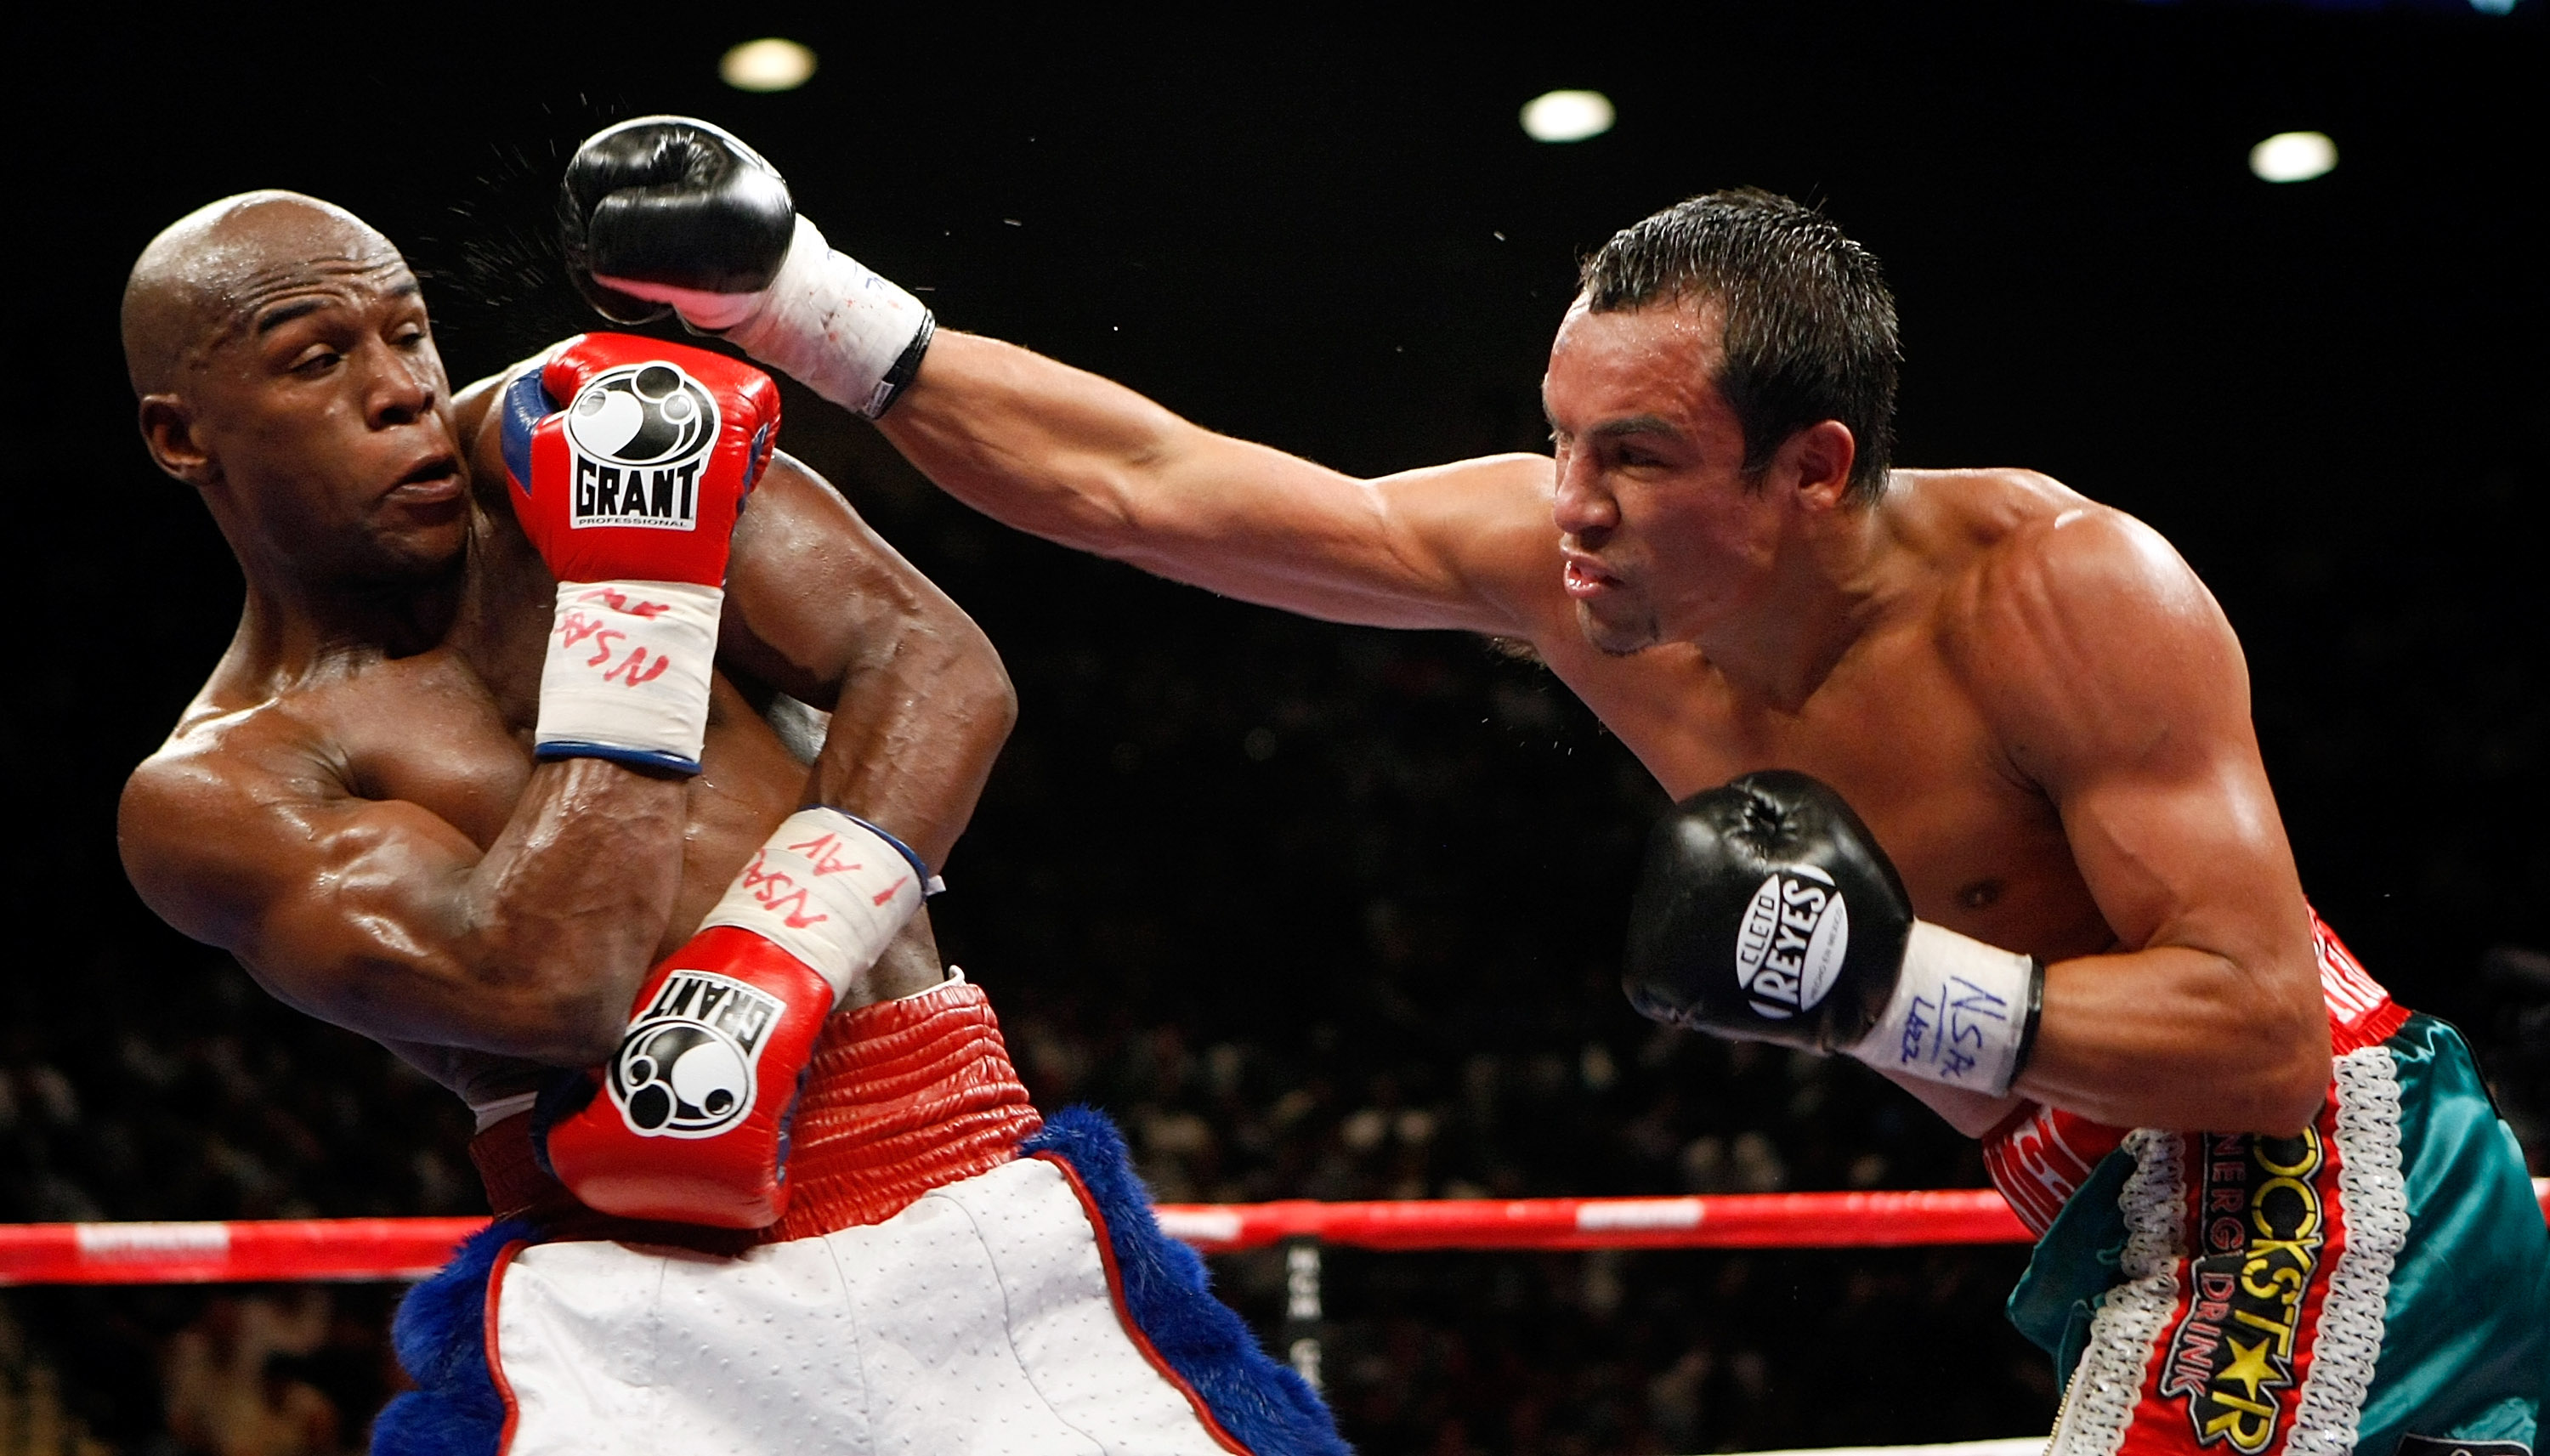 LAS VEGAS - SEPTEMBER 19:  Floyd Mayweather Jr. (L) dodges a punch from Juan Manuel Marquez in the fifth round of their fight at the MGM Grand Garden Arena September 19, 2009 in Las Vegas, Nevada. Mayweather won by unanimous decision.  (Photo by Ethan Mil